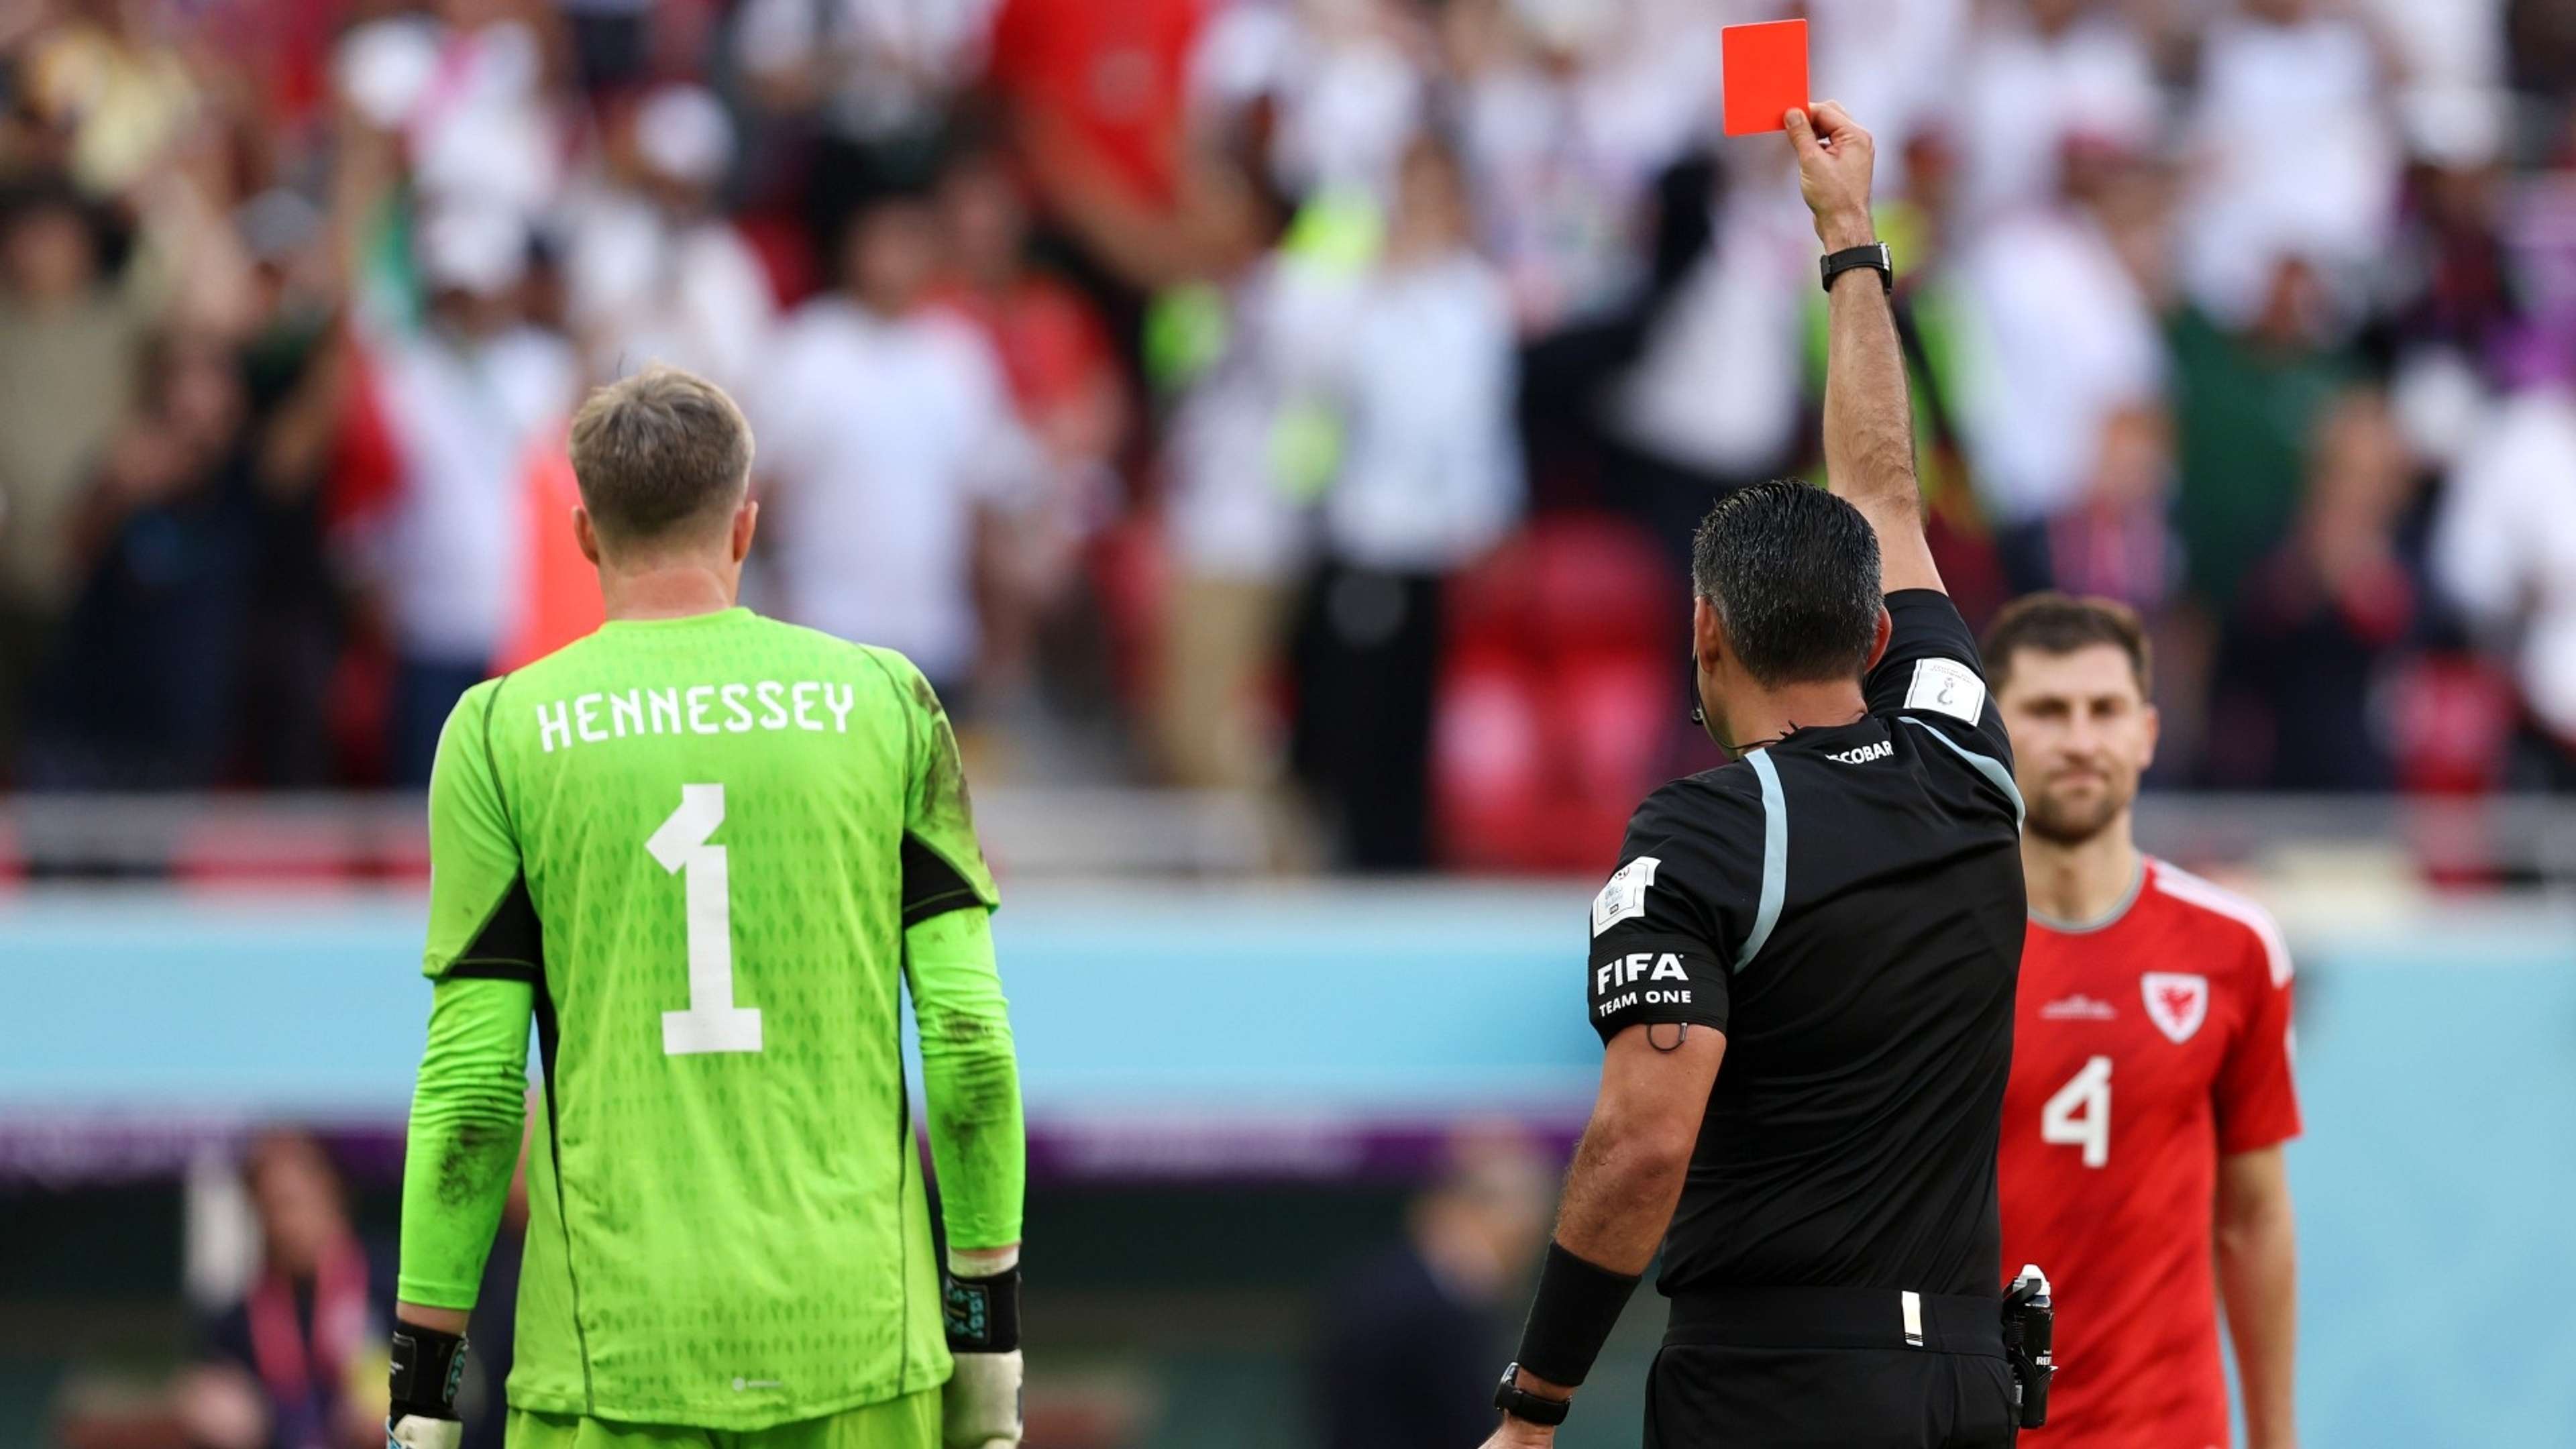 Wayne Hennessey Wales Iran red card 2022 World Cup